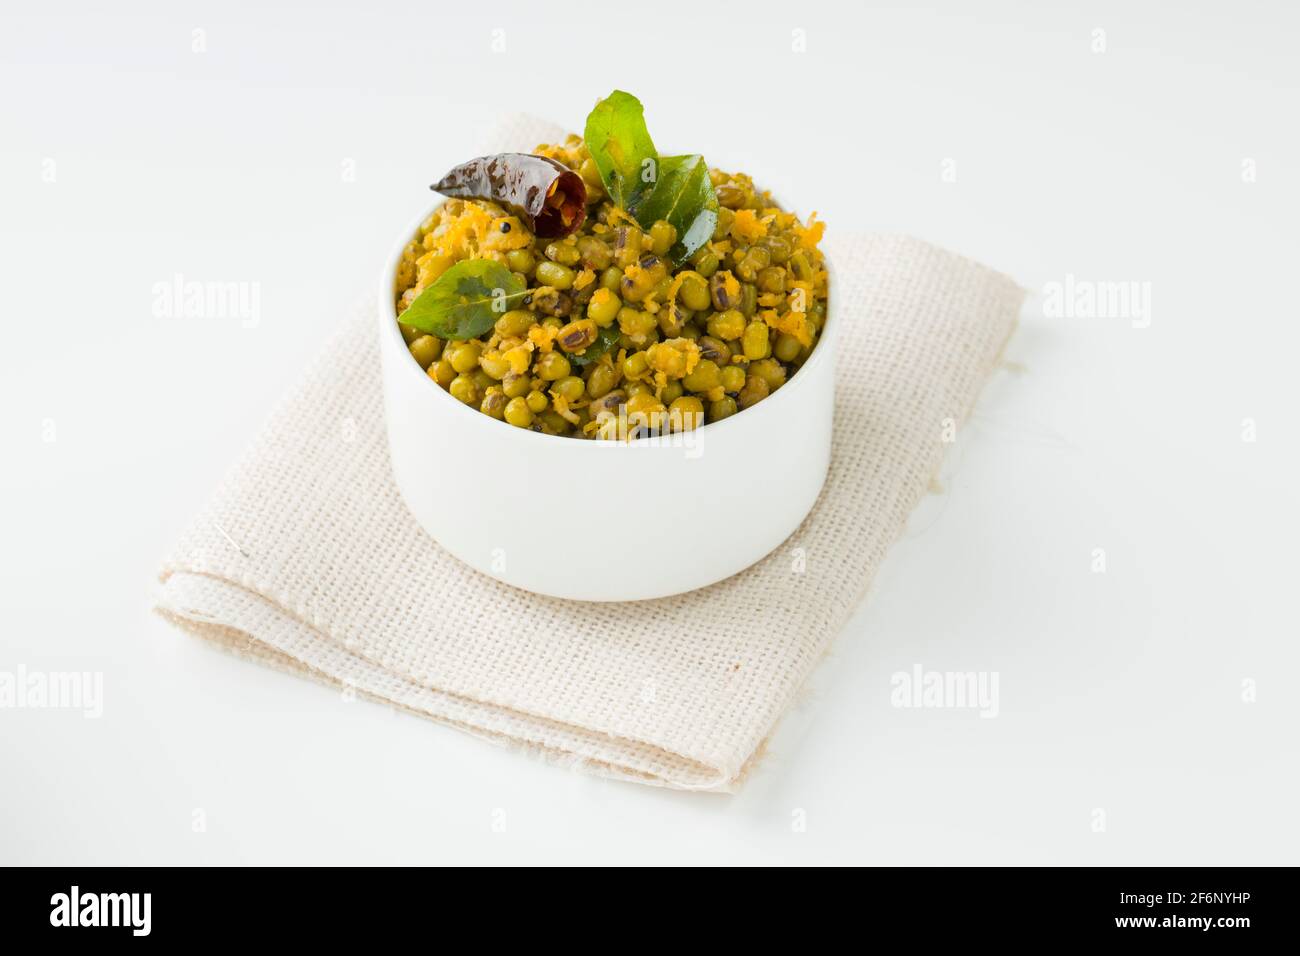 Green gram stir fry or mung bean dry fry,kerala common dish which is very healthy and tasty and it is arranged in a white bowl with white textured bac Stock Photo